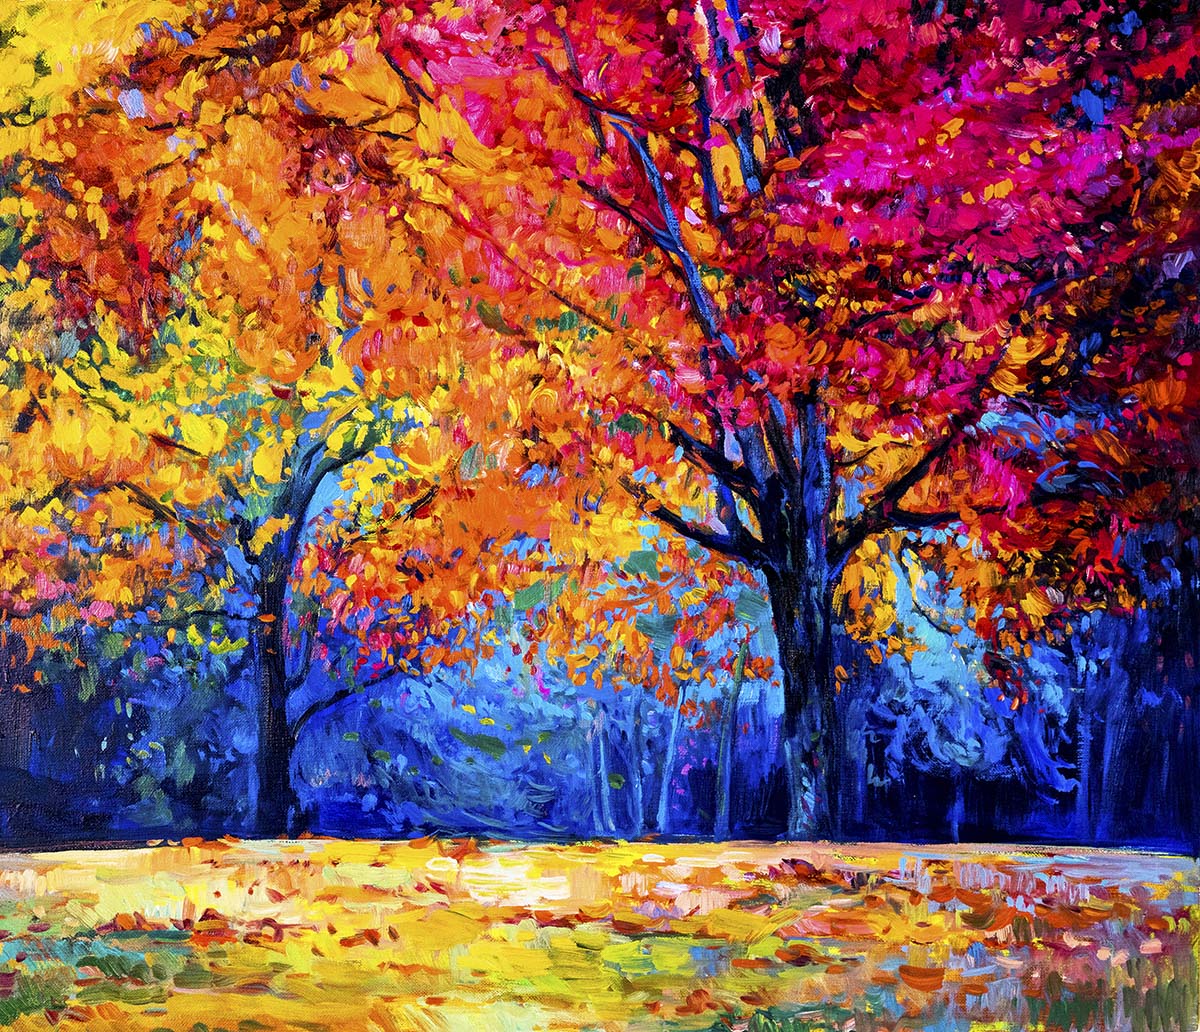 A painting of trees with colorful leaves